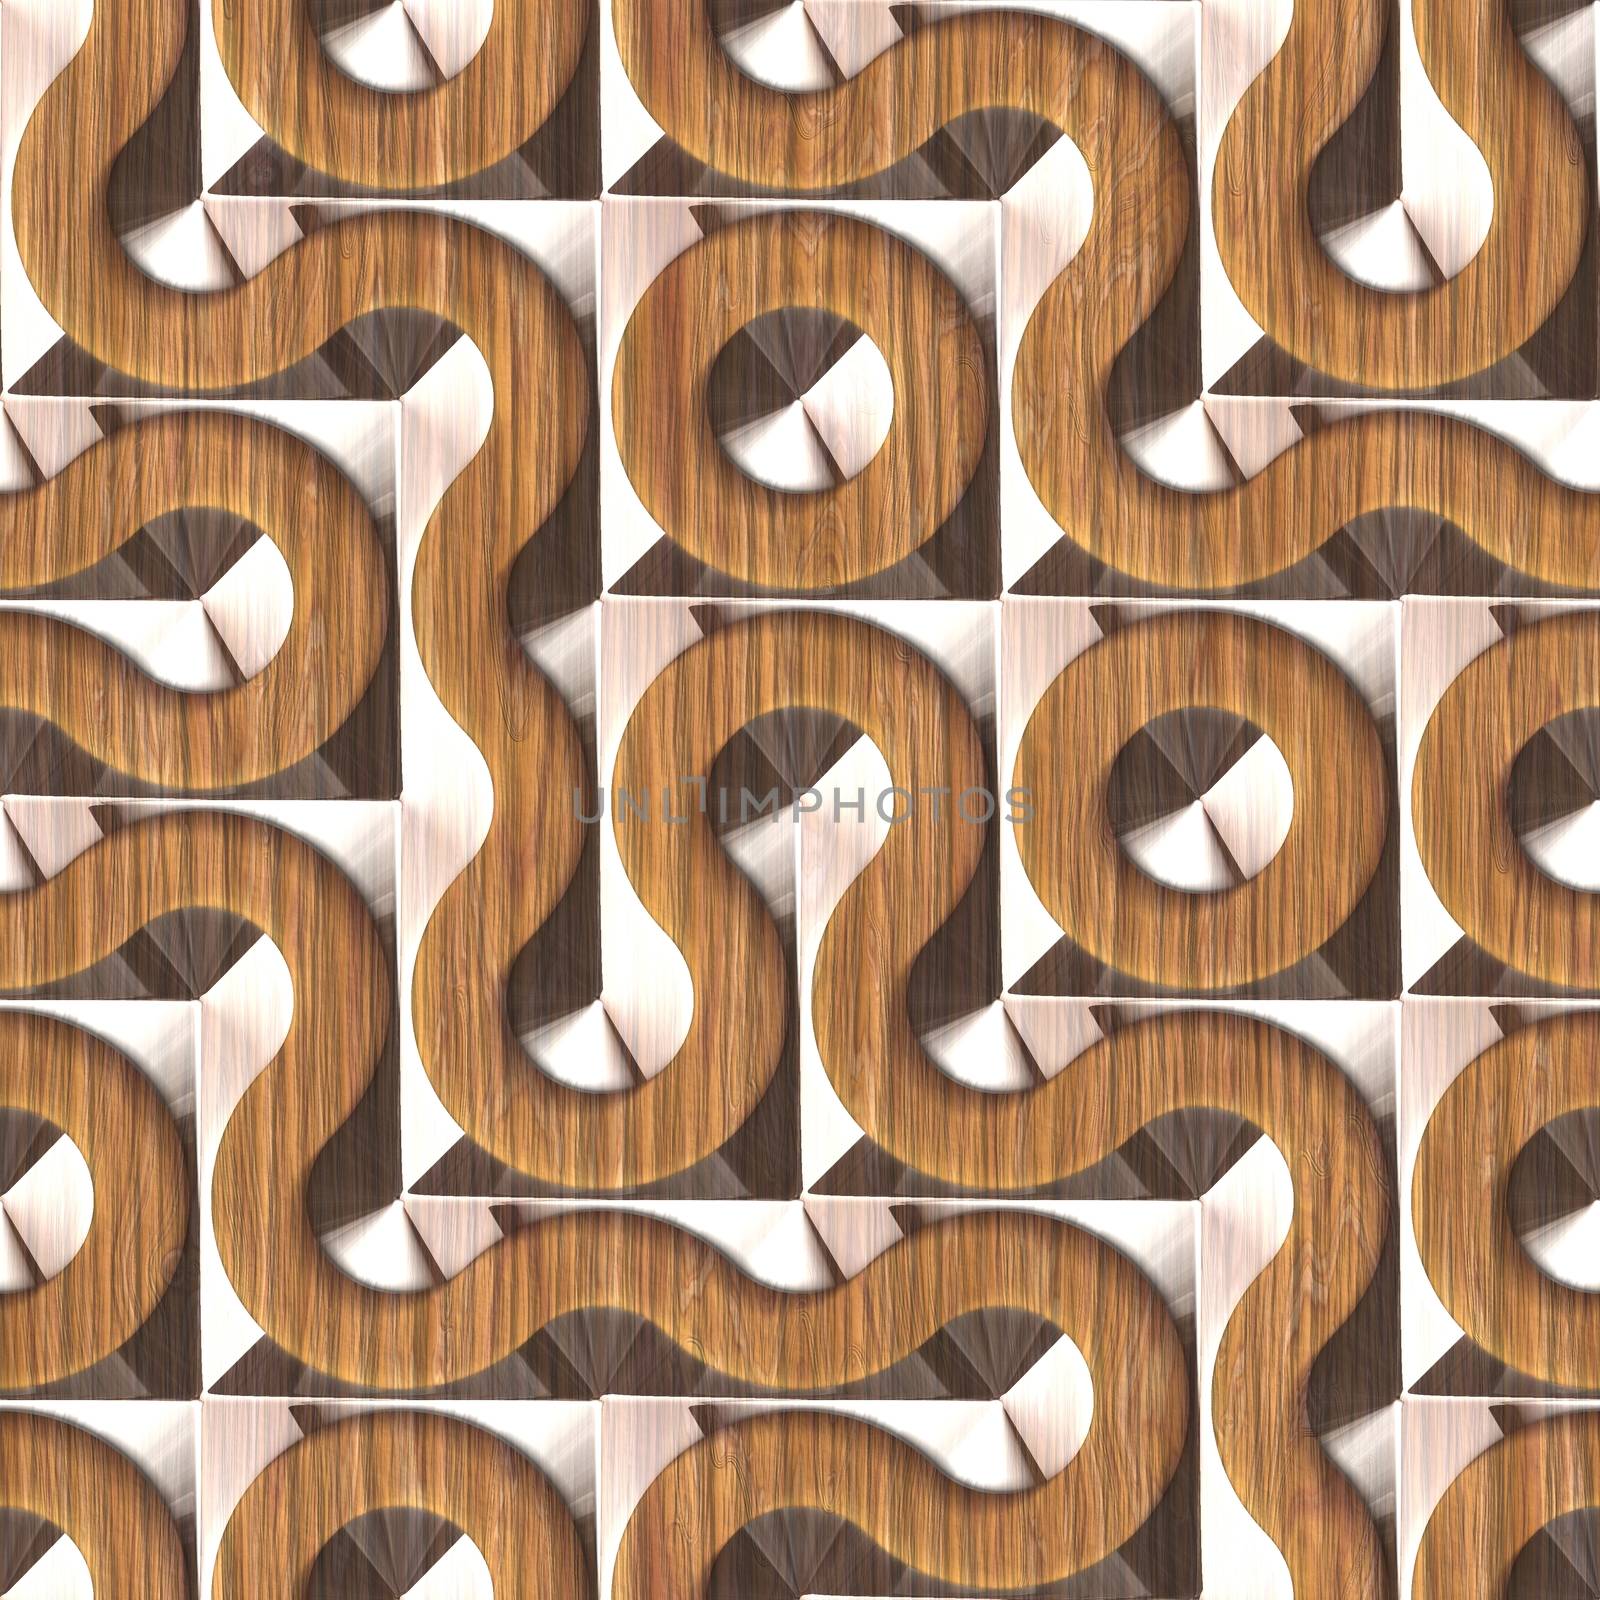 Wood surfaces with glass pattern.